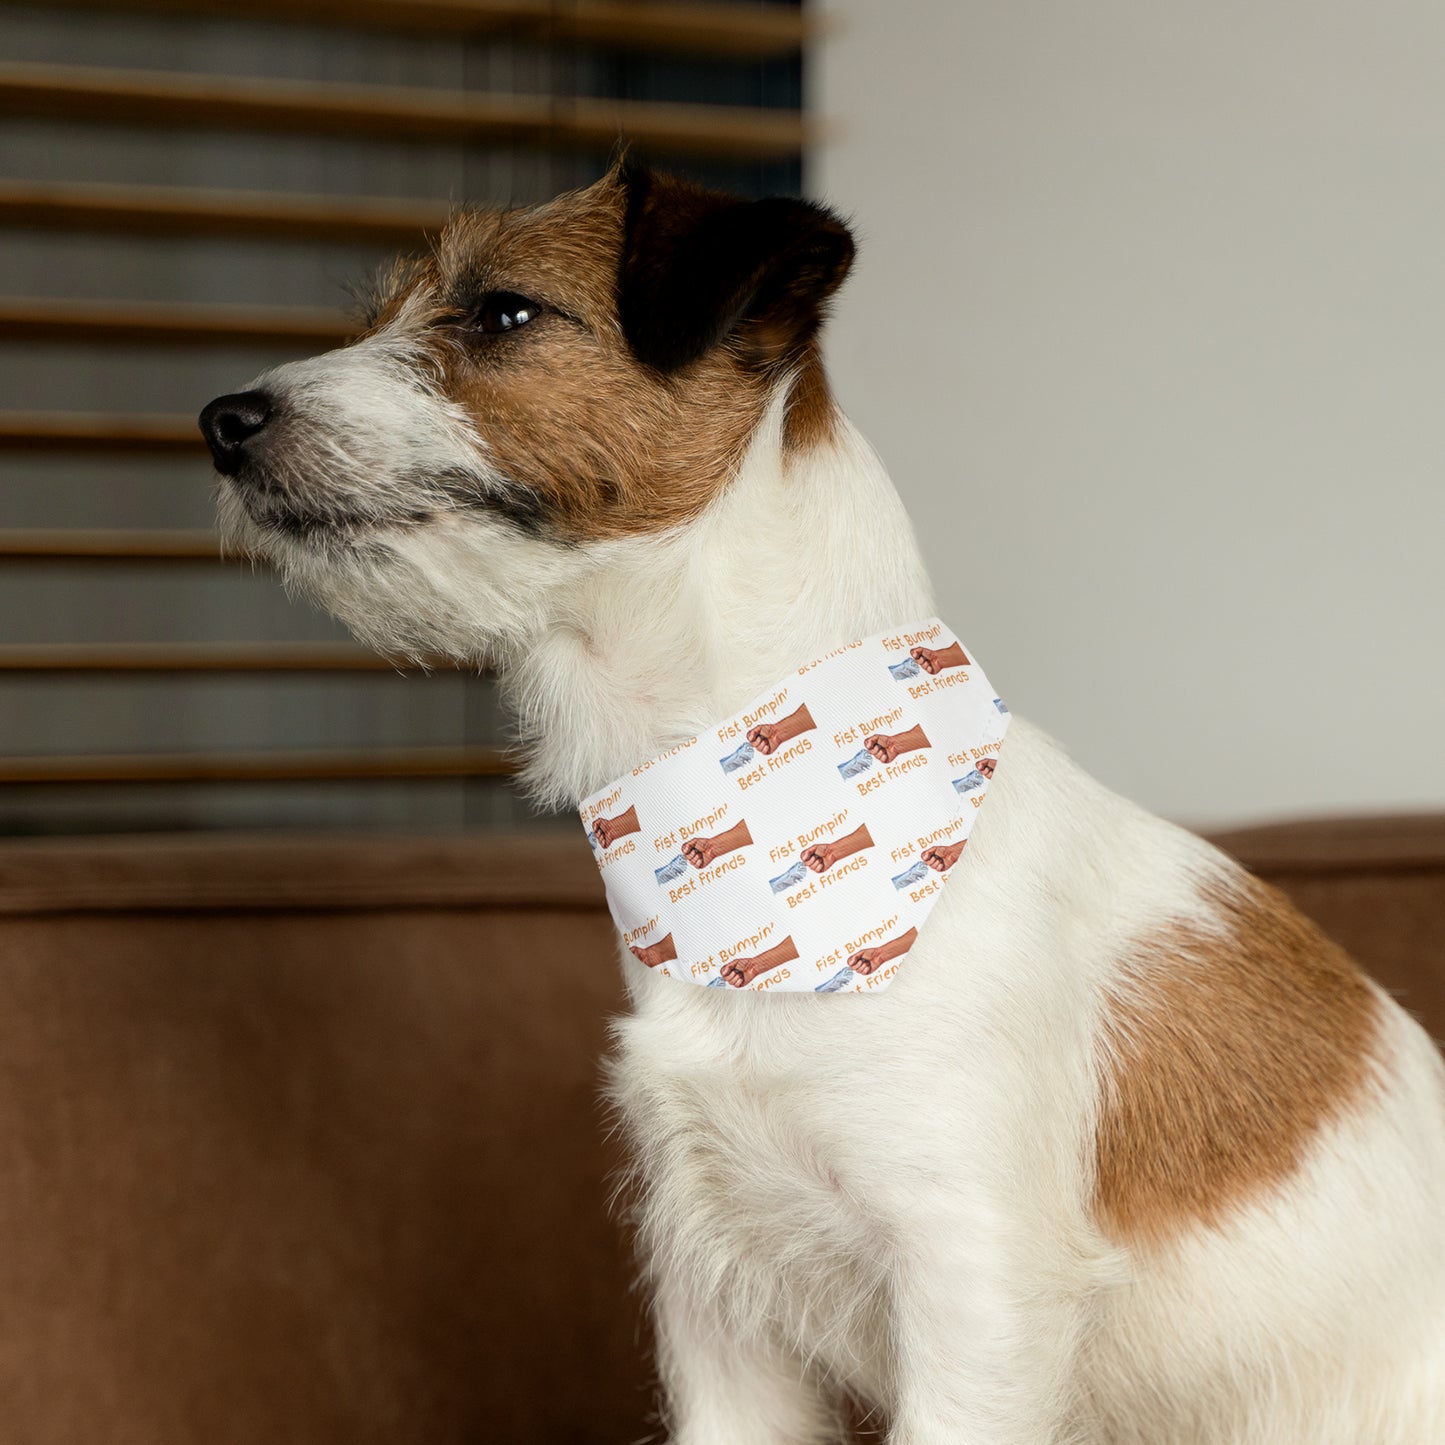 Fist Bumpin’ Best Friends Opie’s Cavalier King Charles Spaniel Pet Bandana Collar White with Gold lettering.